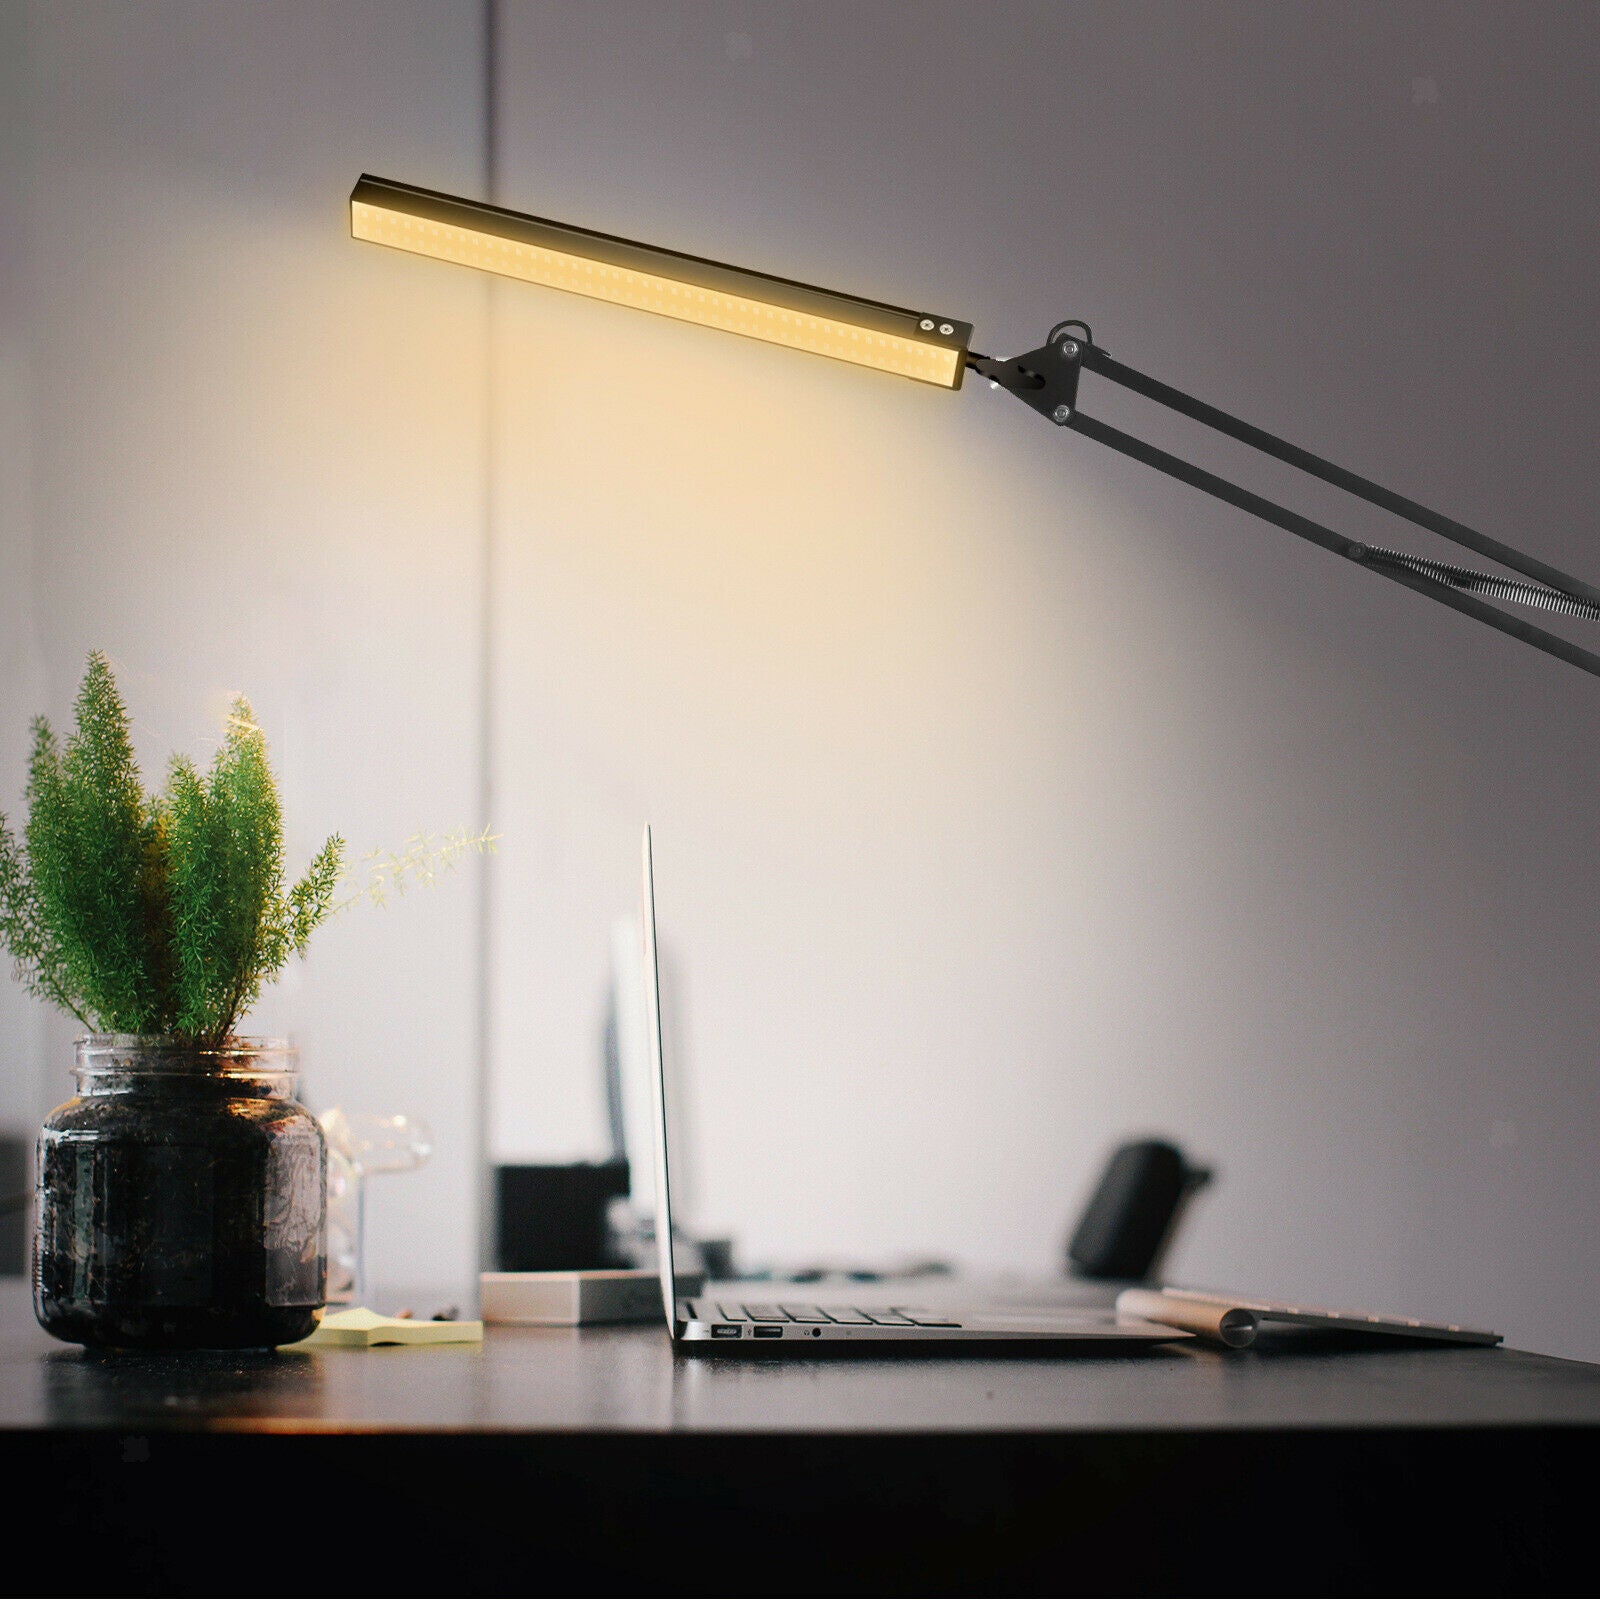 Swing Arm LED Desk Lamp with Clamp, with 3 Color Modes Dimming Light